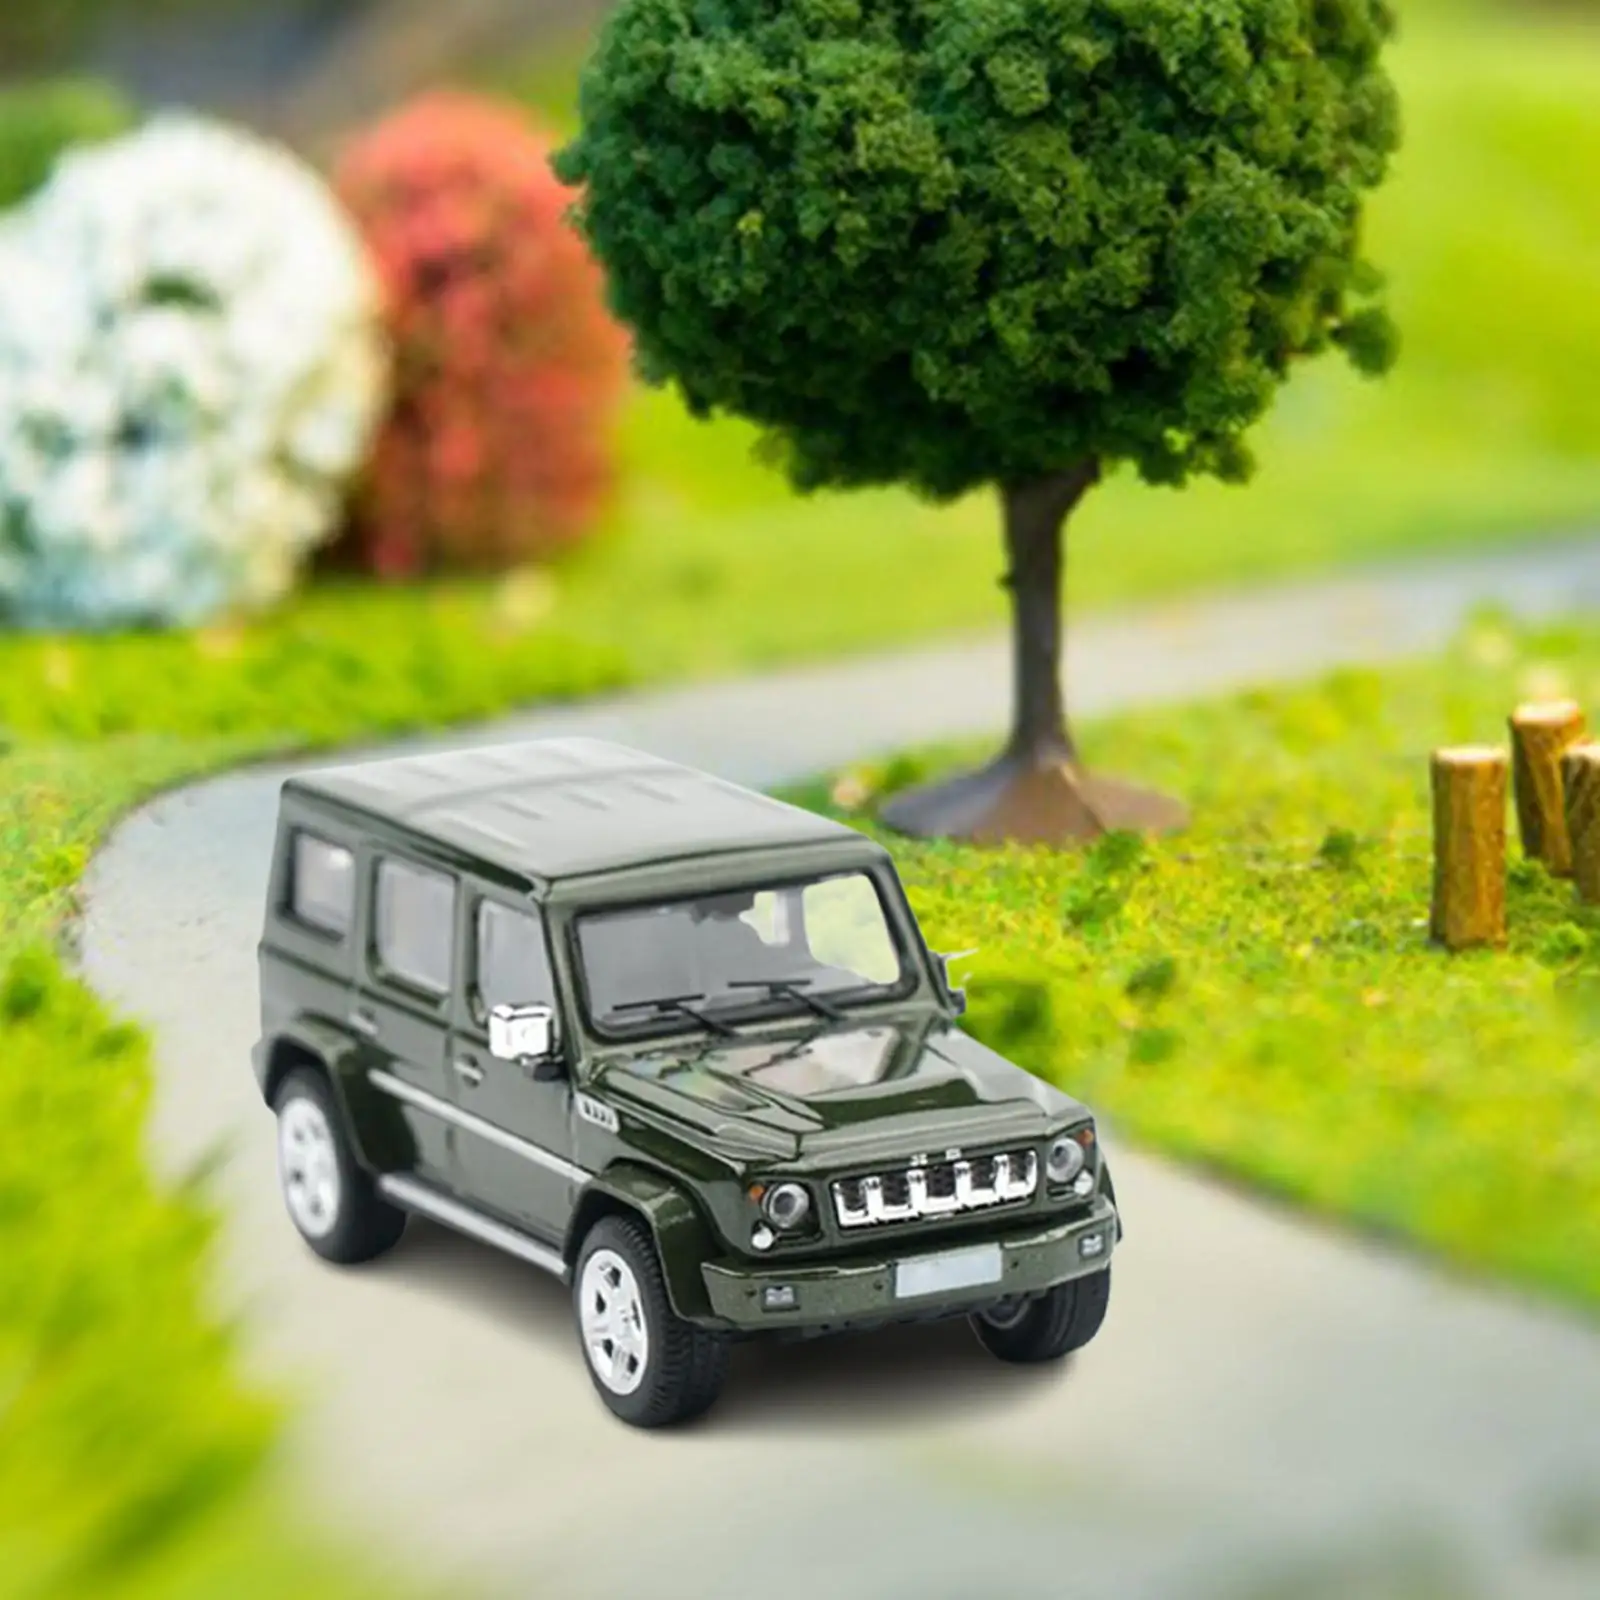 1:64 Diorama Street Car Model Diecast Toys Diorama Scenes for Diorama Photography Props Scenery Landscape Decoration Accessories